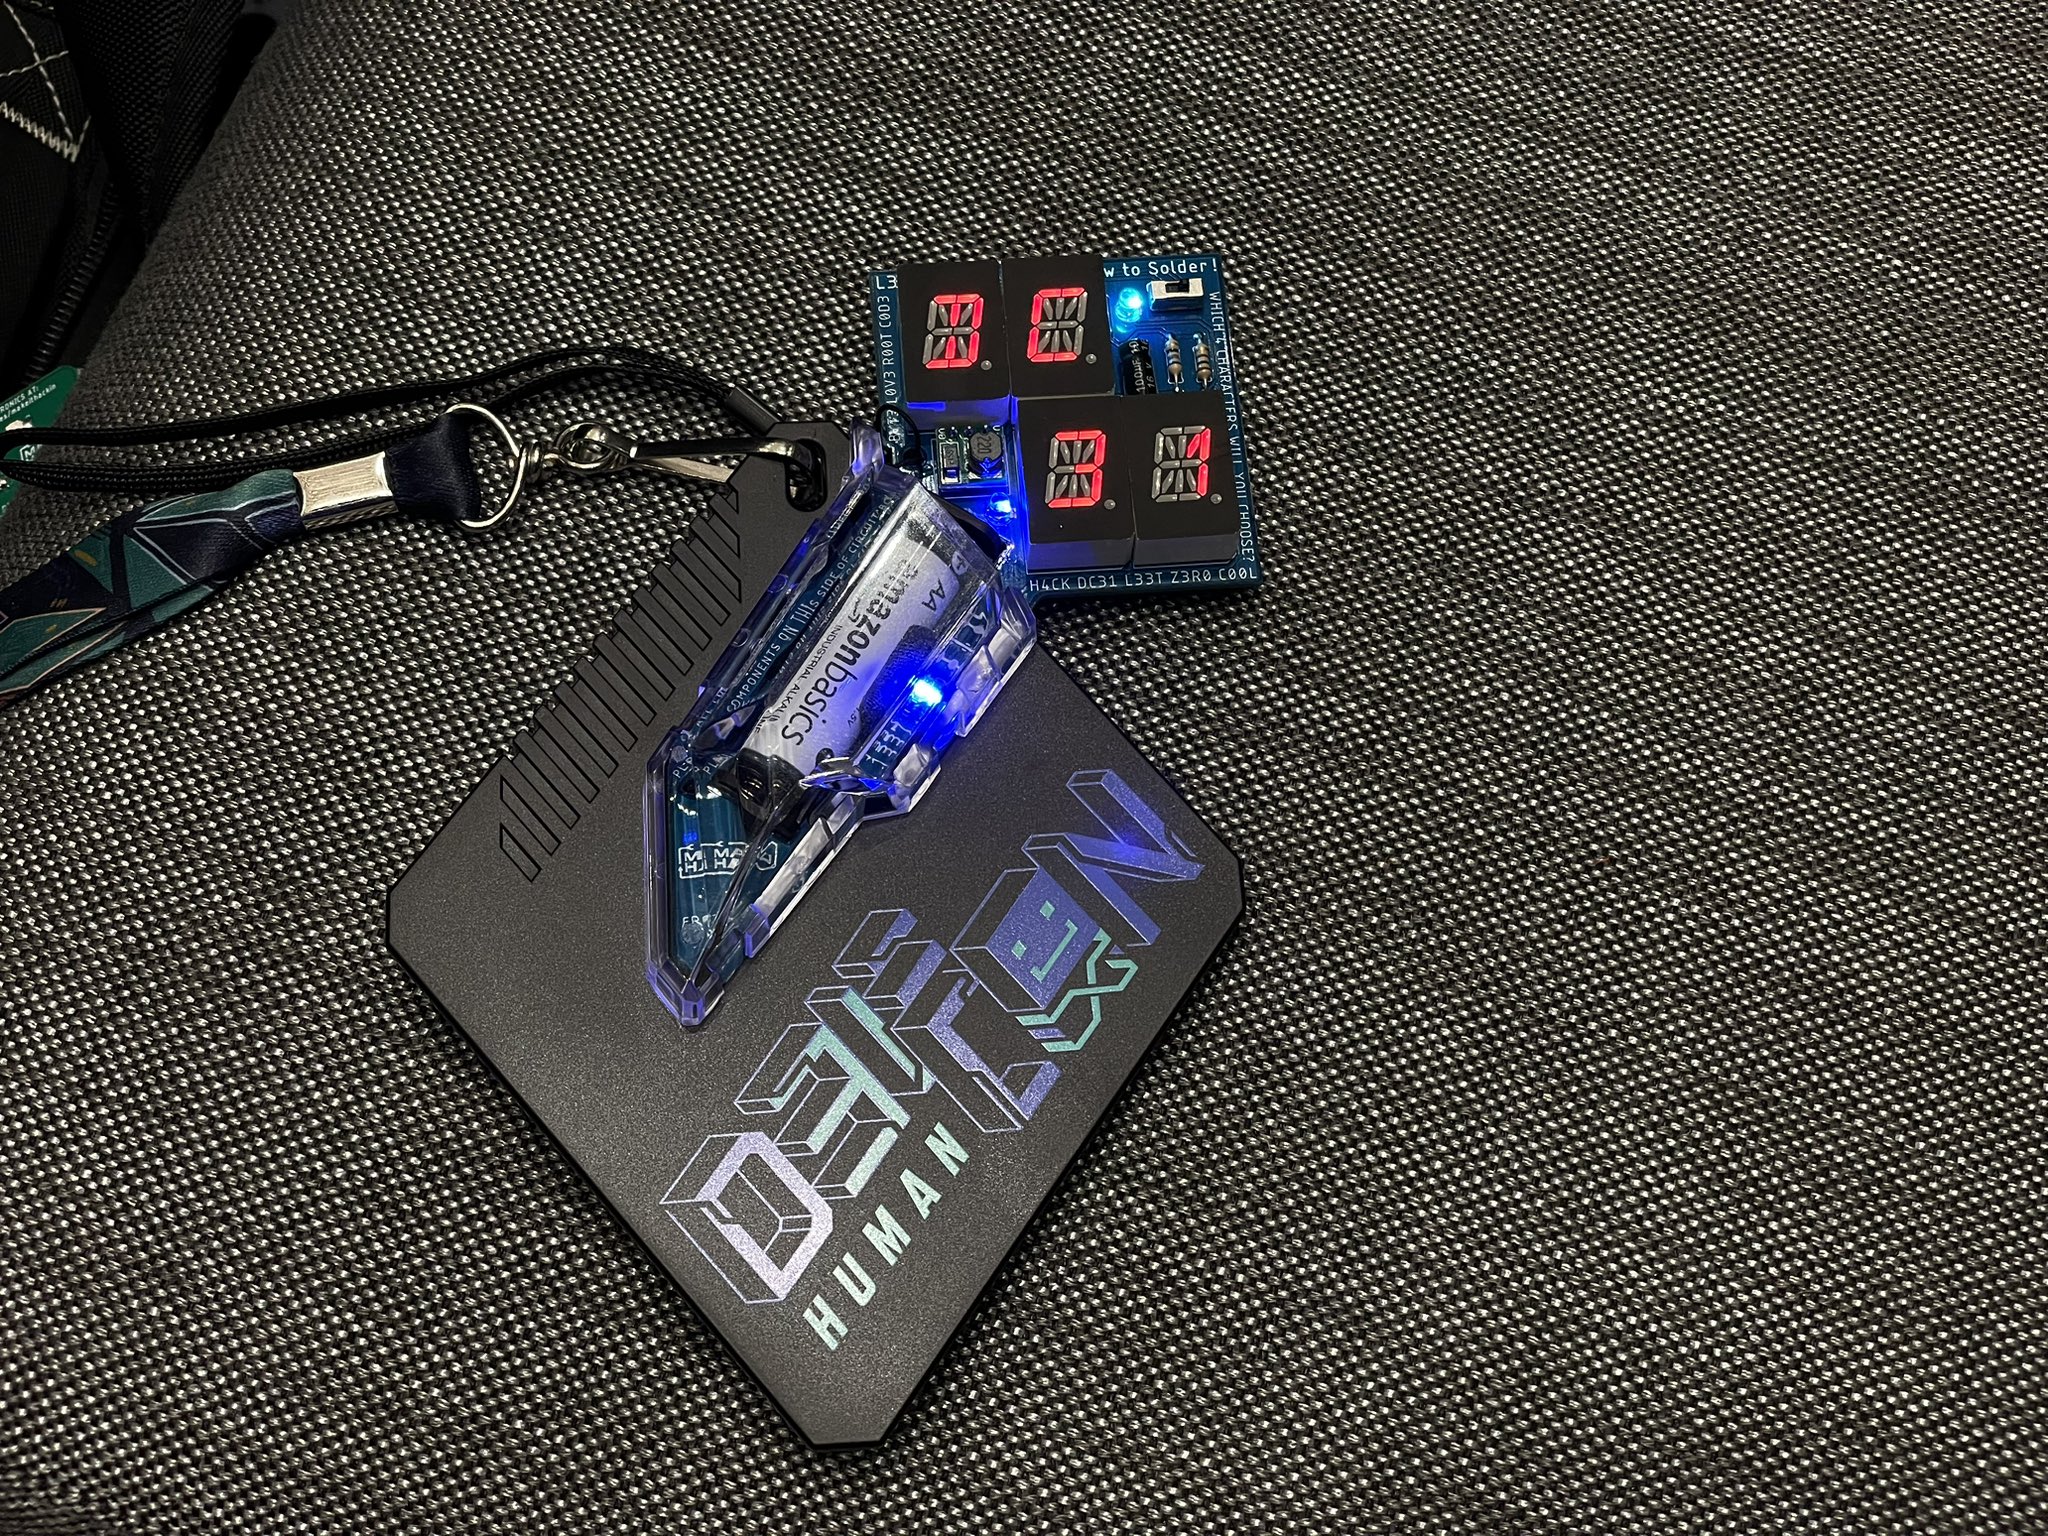 Make It Hackin on X: Spice up your DEF CON badge with electronics. The  L33T Badge and Chamber SAO Adapter are available at Hacker Warehouse booth  in the vendor area. The Flooper